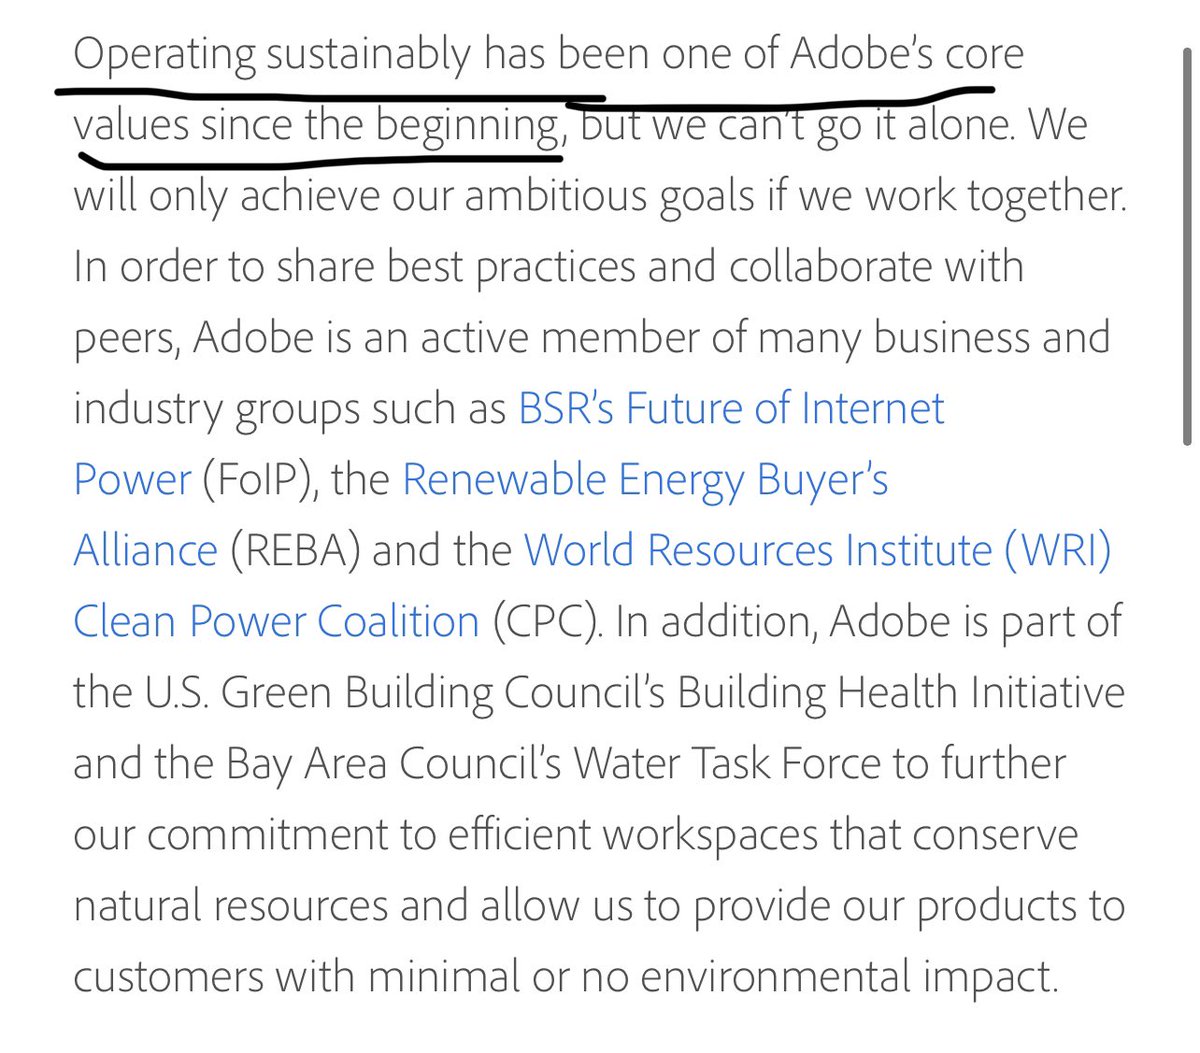 Quick info about some of  $STPK/Stem’s partners: (5/6) $ADBE/Adobe: “Operating sustainably has been one of Adobe’s core values since the beginning”. Key partner from a longterm perspective imo. https://www.adobe.com/corporate-responsibility/sustainability/energy-conservation.html